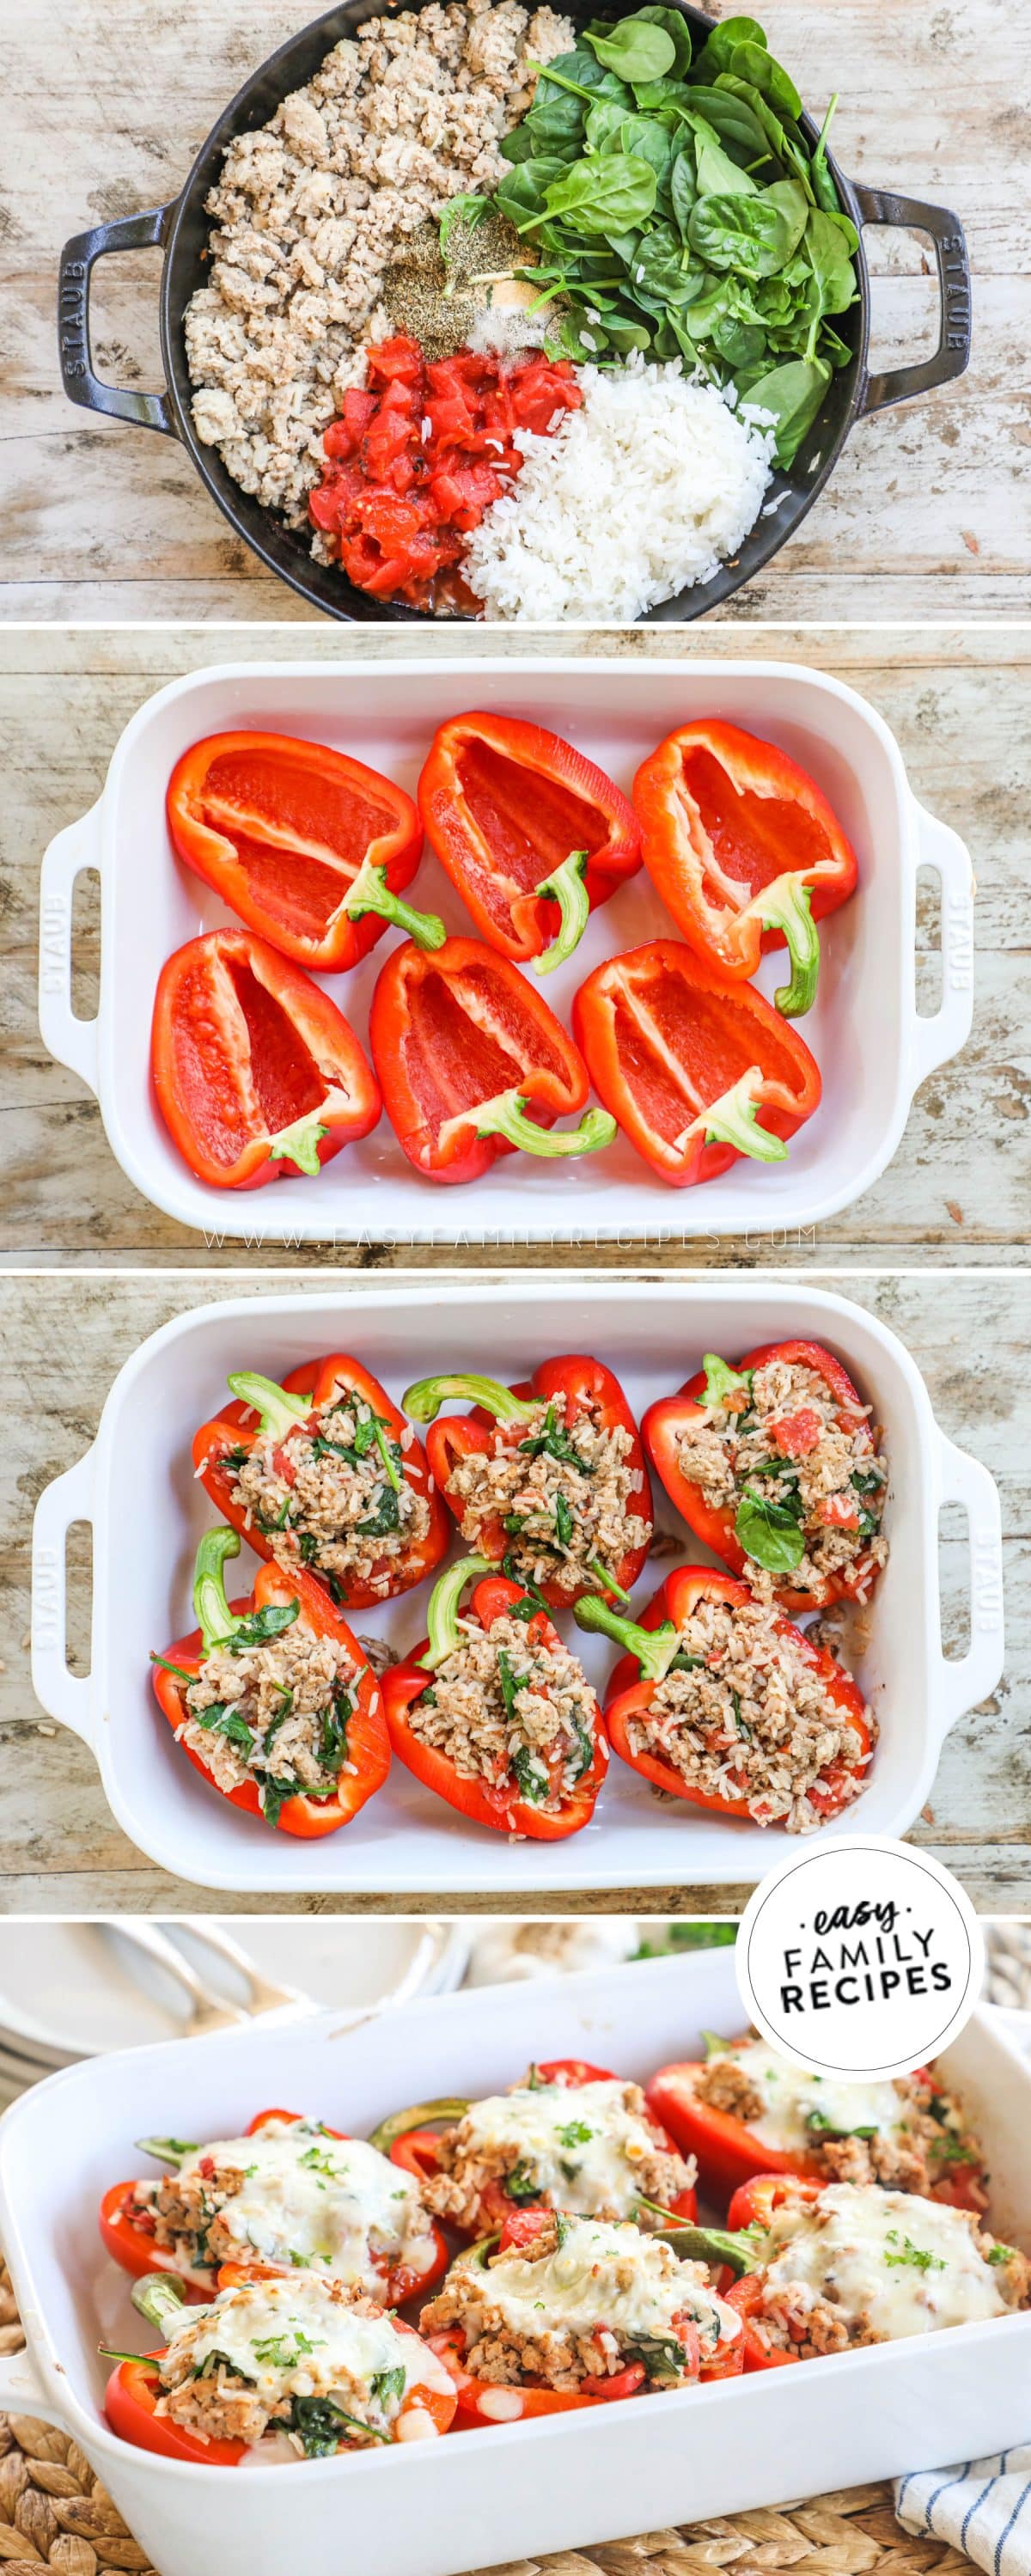 How to make chicken stuffed peppers: 1) cook the filling, 2) cut and seed the peppers, 3) stuff the peppers, 4) add cheese and bake